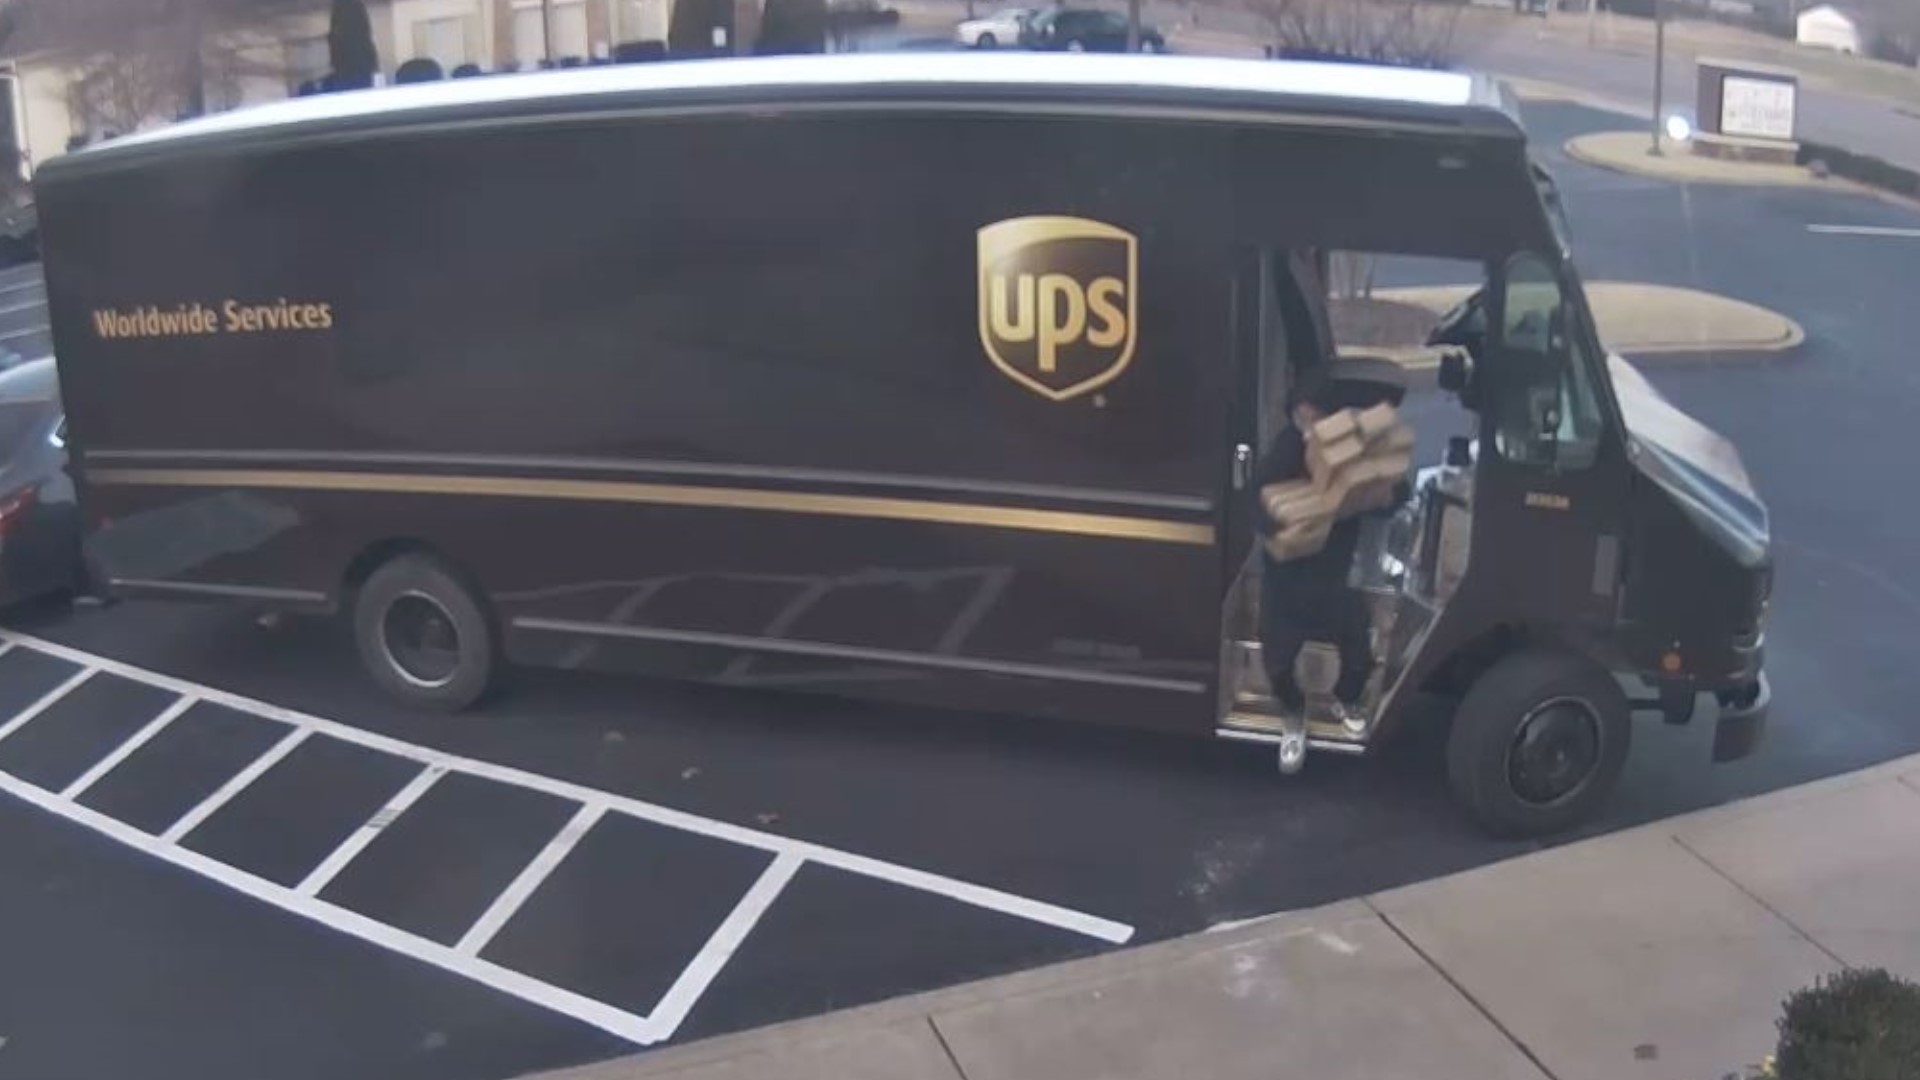 MPD searching for thieves who stole from at least 2 UPS trucks